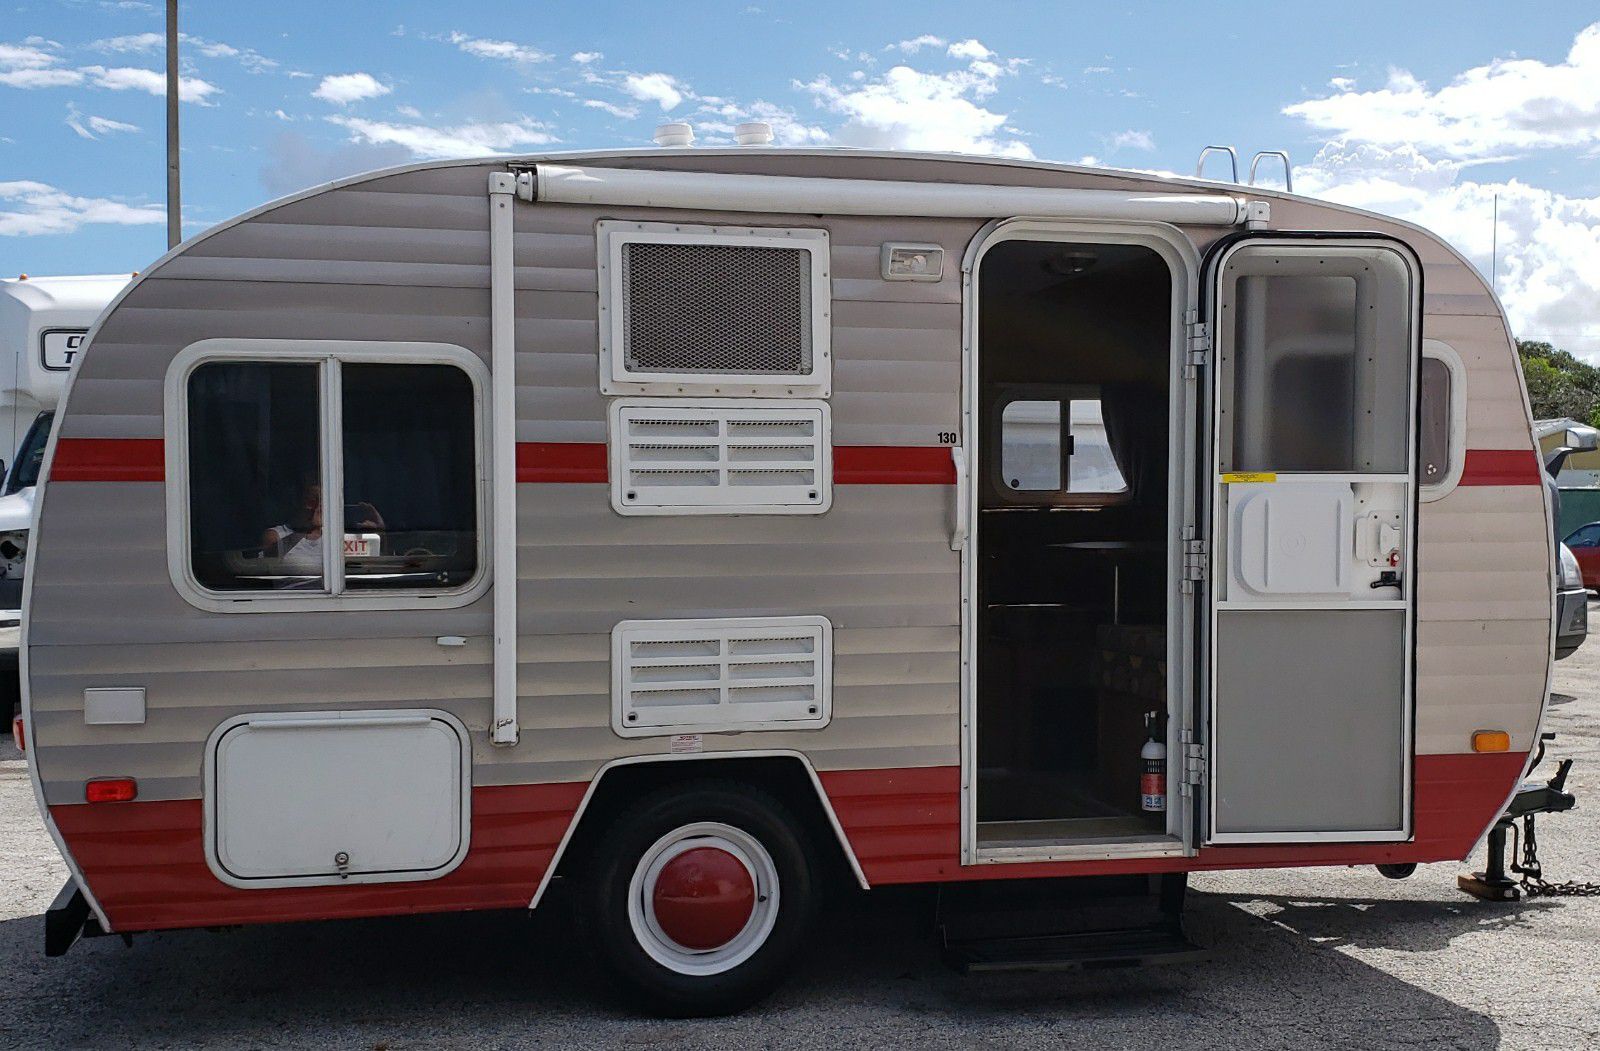 2012 13Ft, White Water retro sleeps 4 ready to go camping